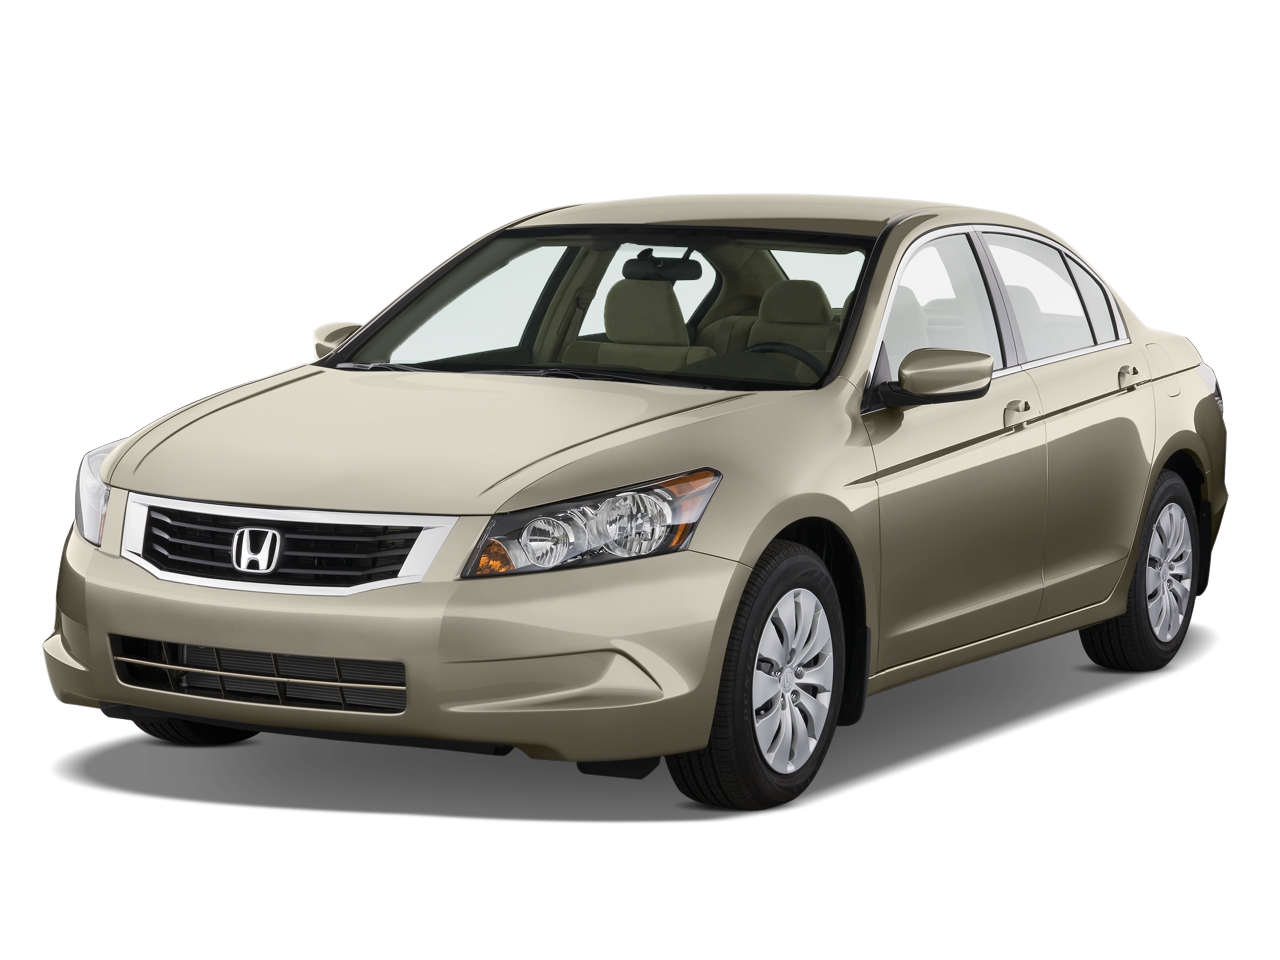 2008 Honda Accord Buyer's Guide: Reviews, Specs, Comparisons